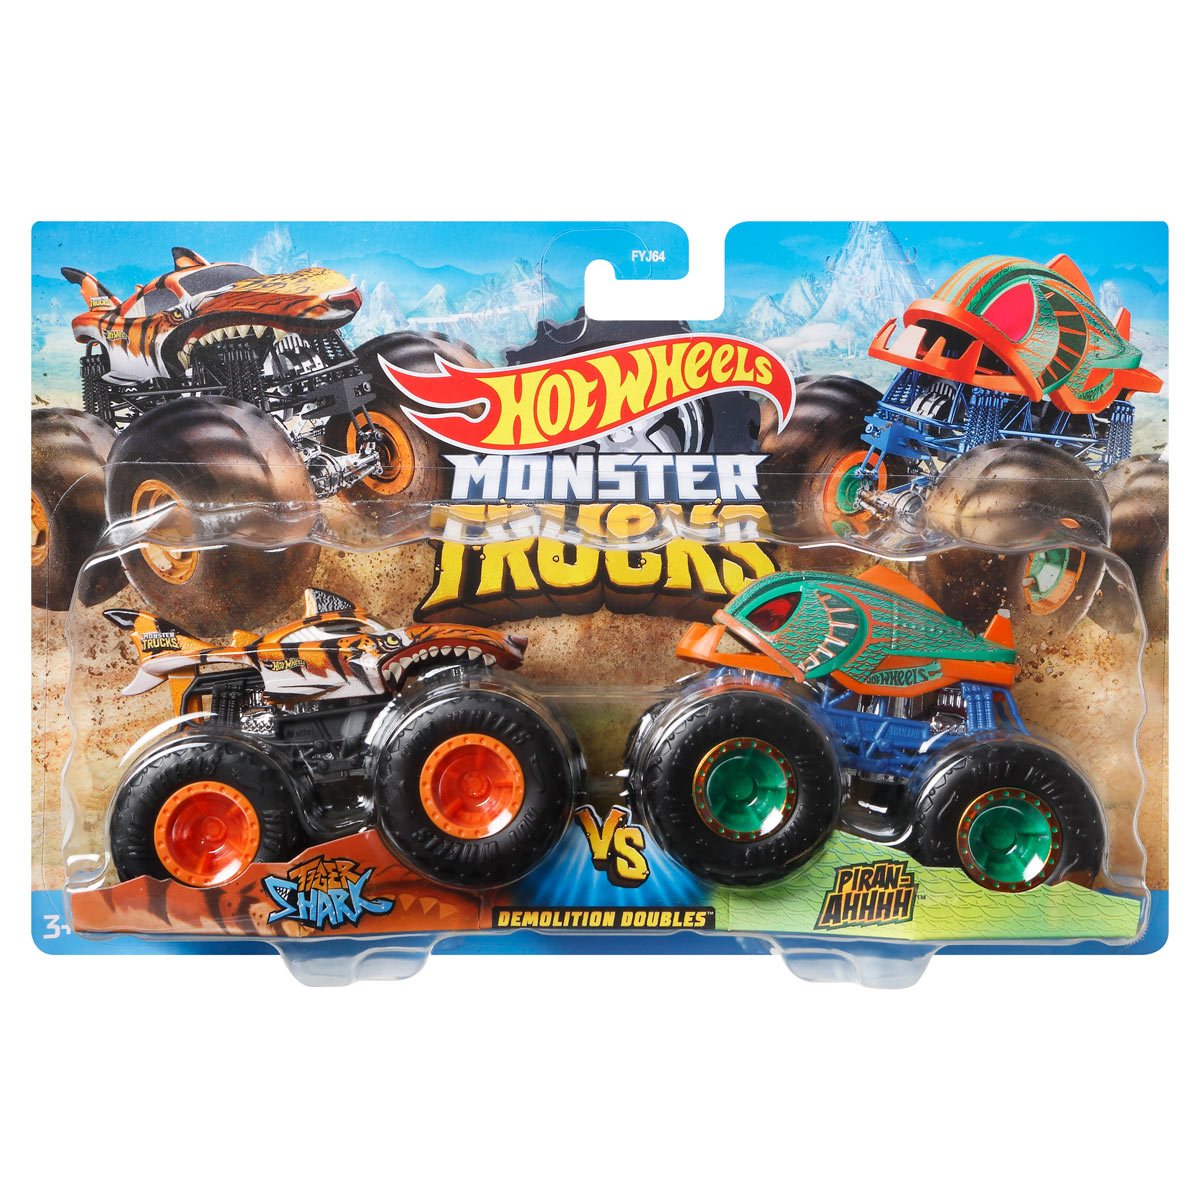 Hot Wheels Monster Trucks 1:64 Scale TOO S'COOL, Includes Hot